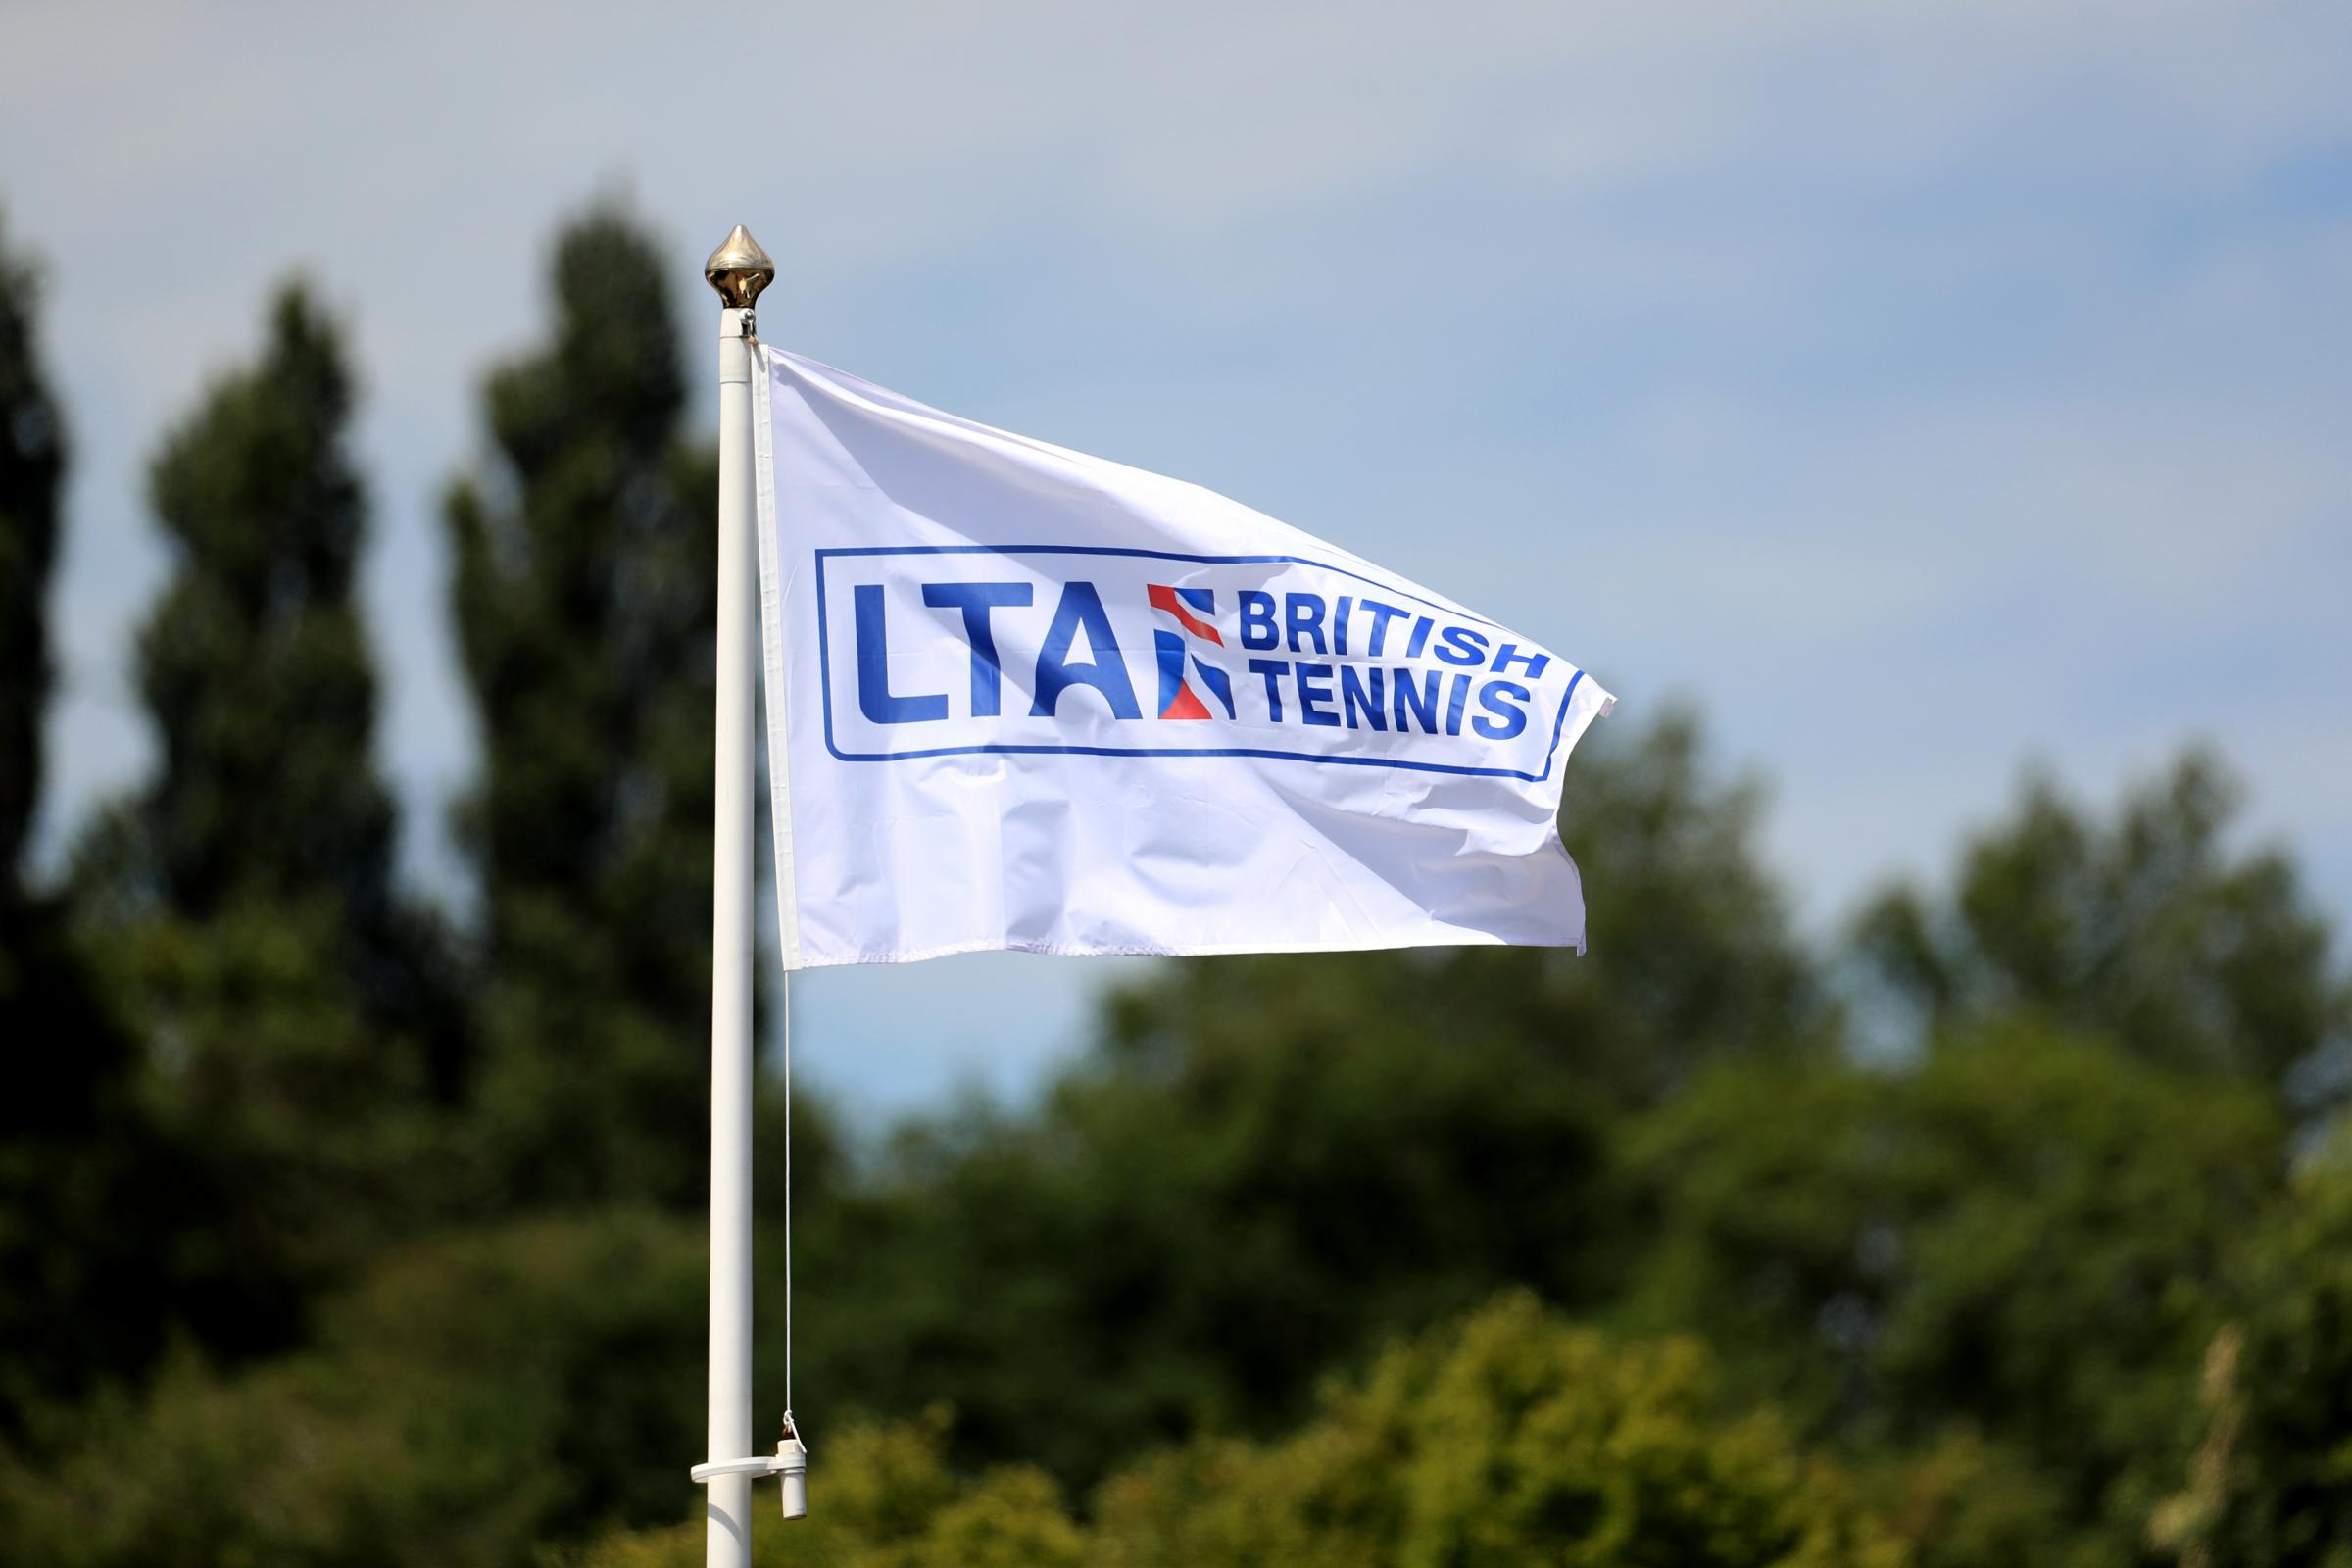 LTA raises a fund of 20 million pounds to support the British tennis industry